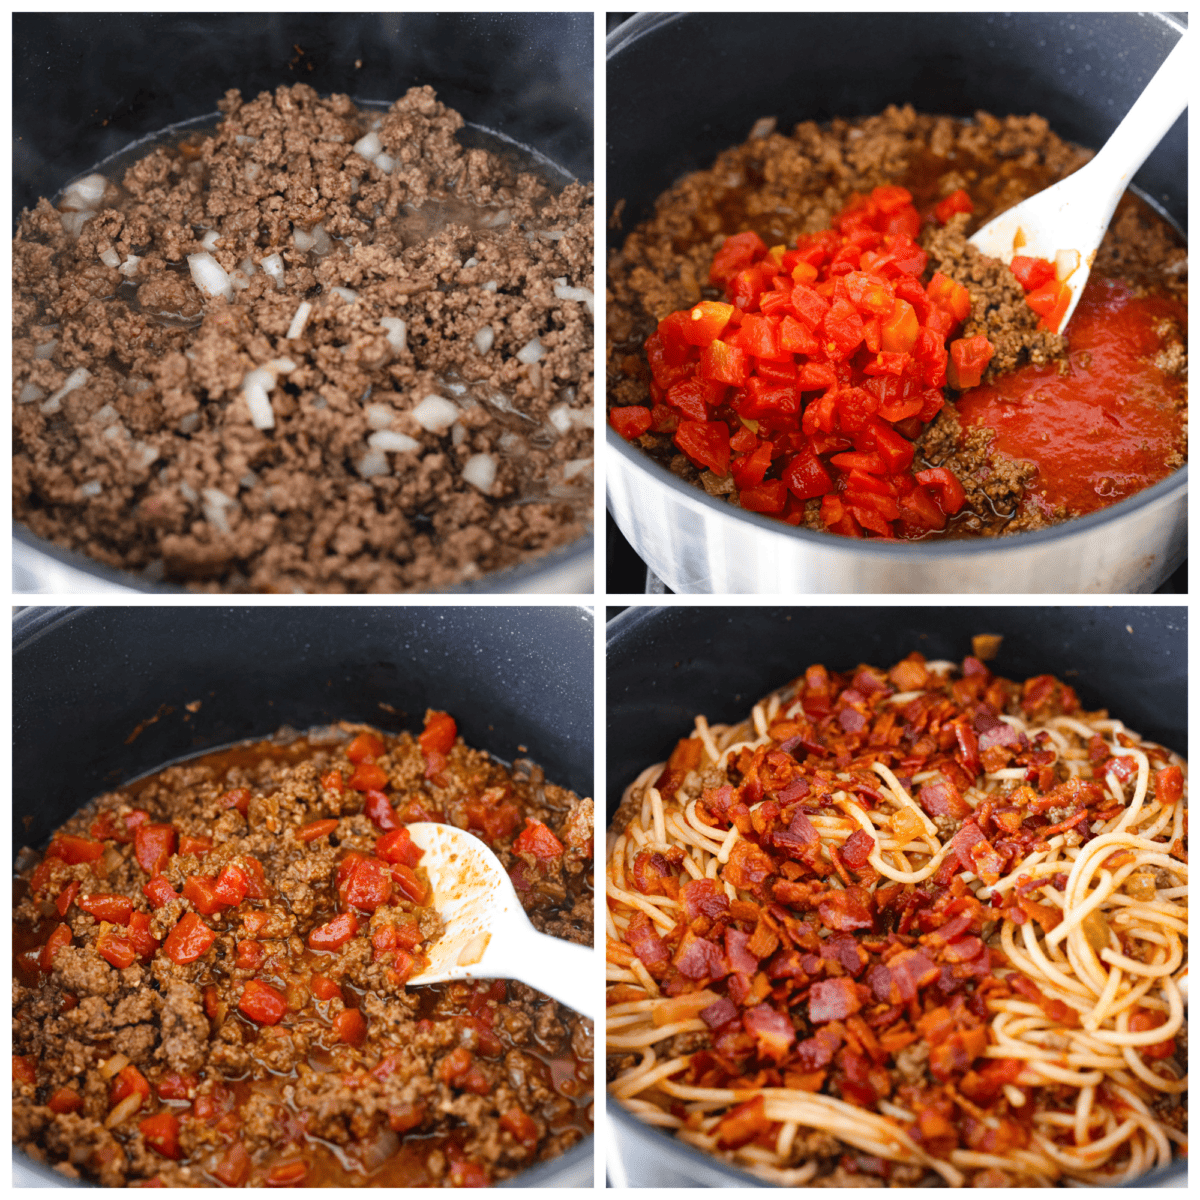 4-photo collage of the ground beef mixture being prepared and combined with the pasta. - Cowboy Spaghetti